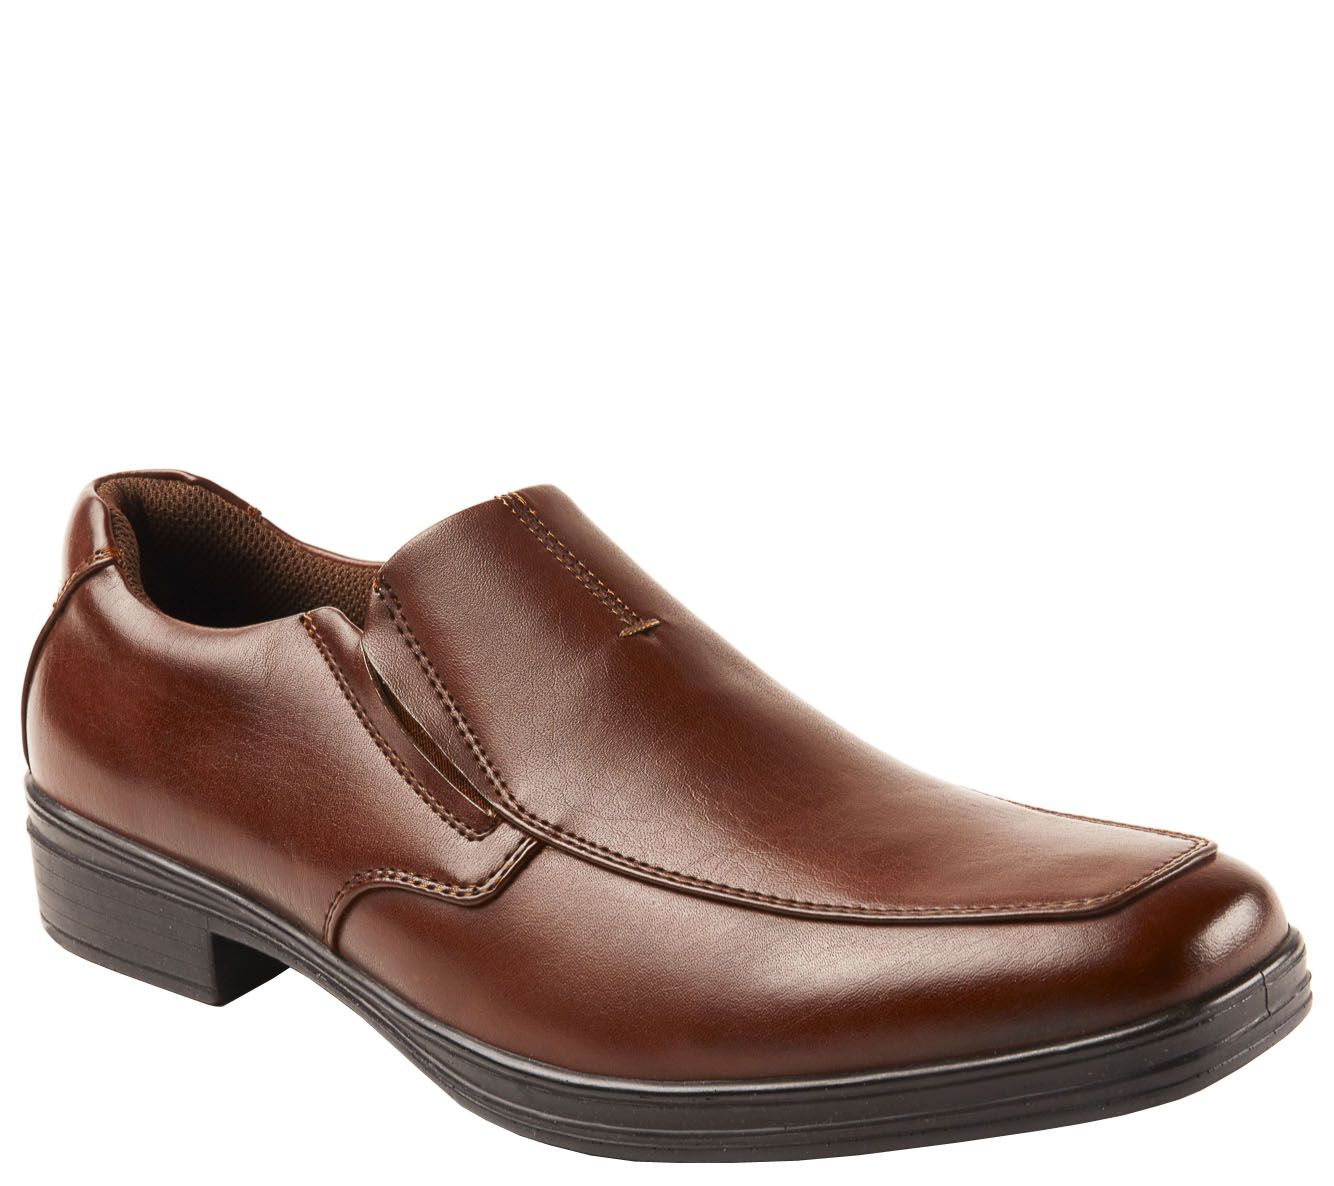 Deer Stags Men's 902 Loafers - Fit - QVC.com